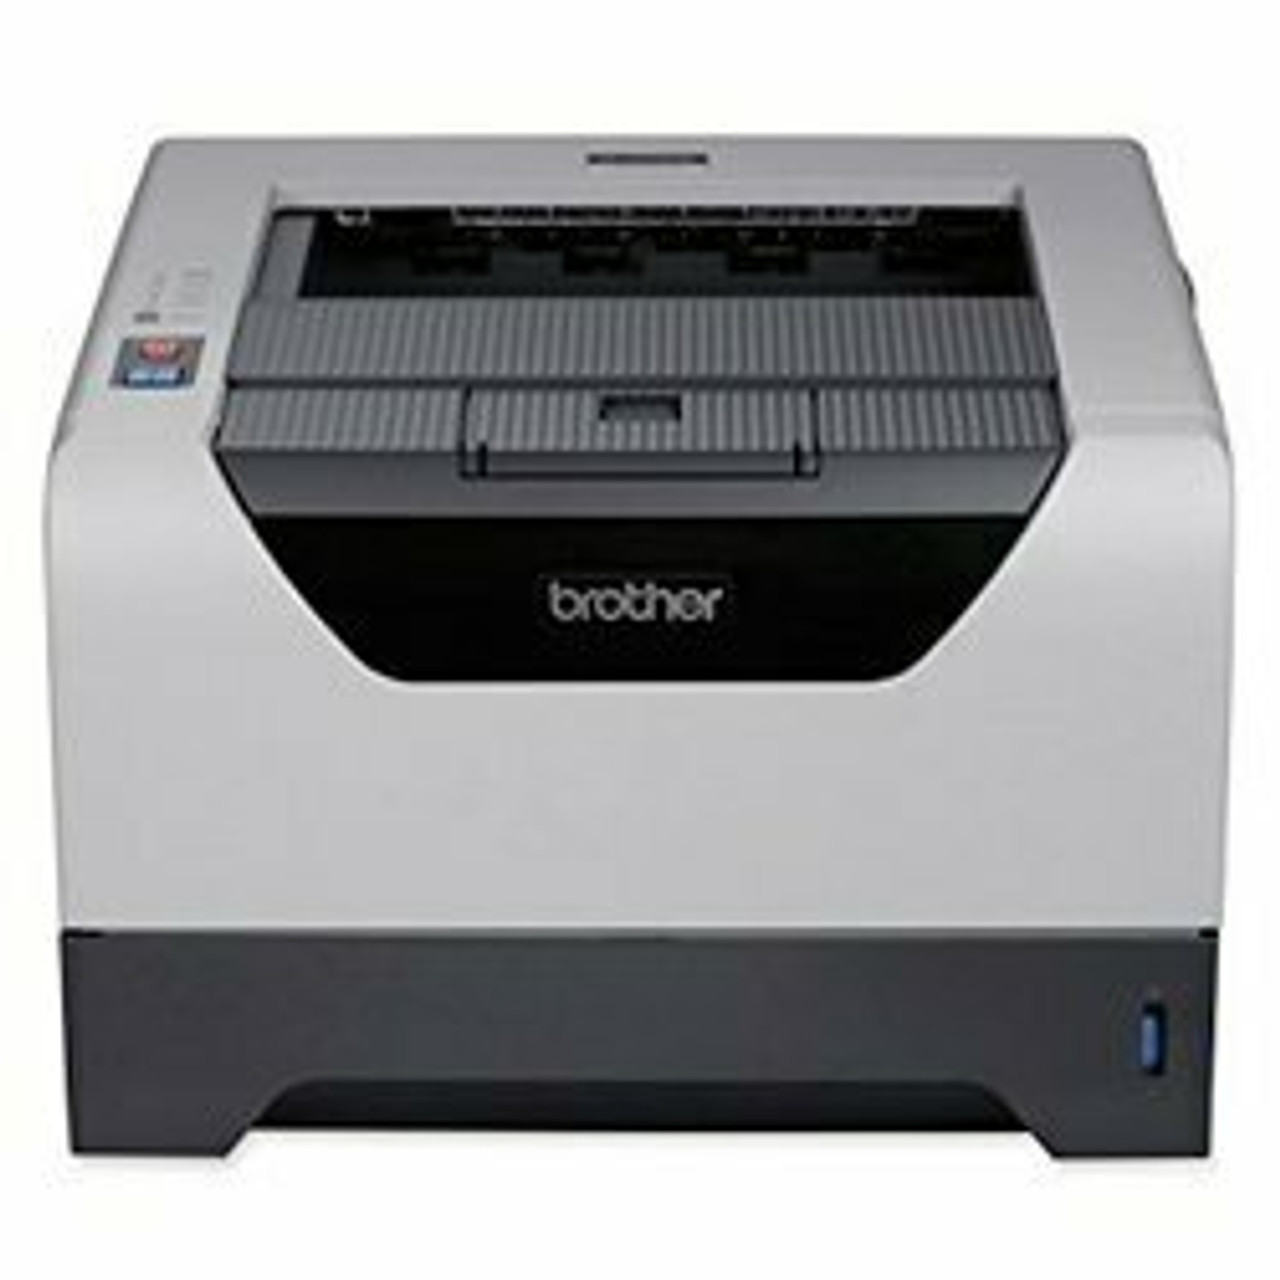 Brother HL-5250DN